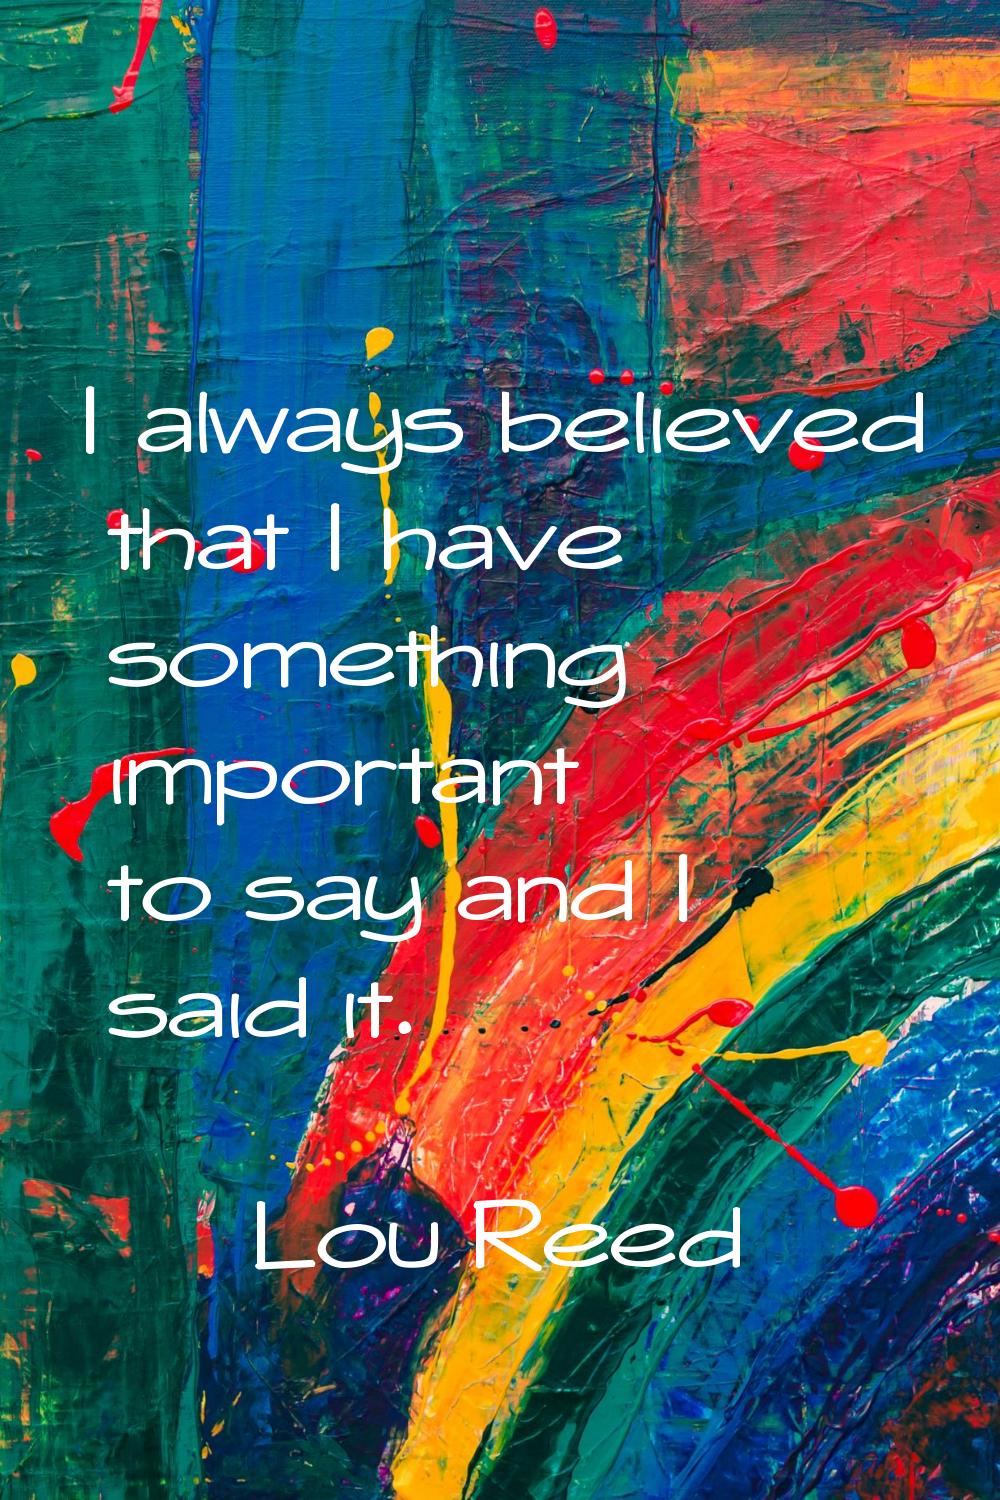 I always believed that I have something important to say and I said it.